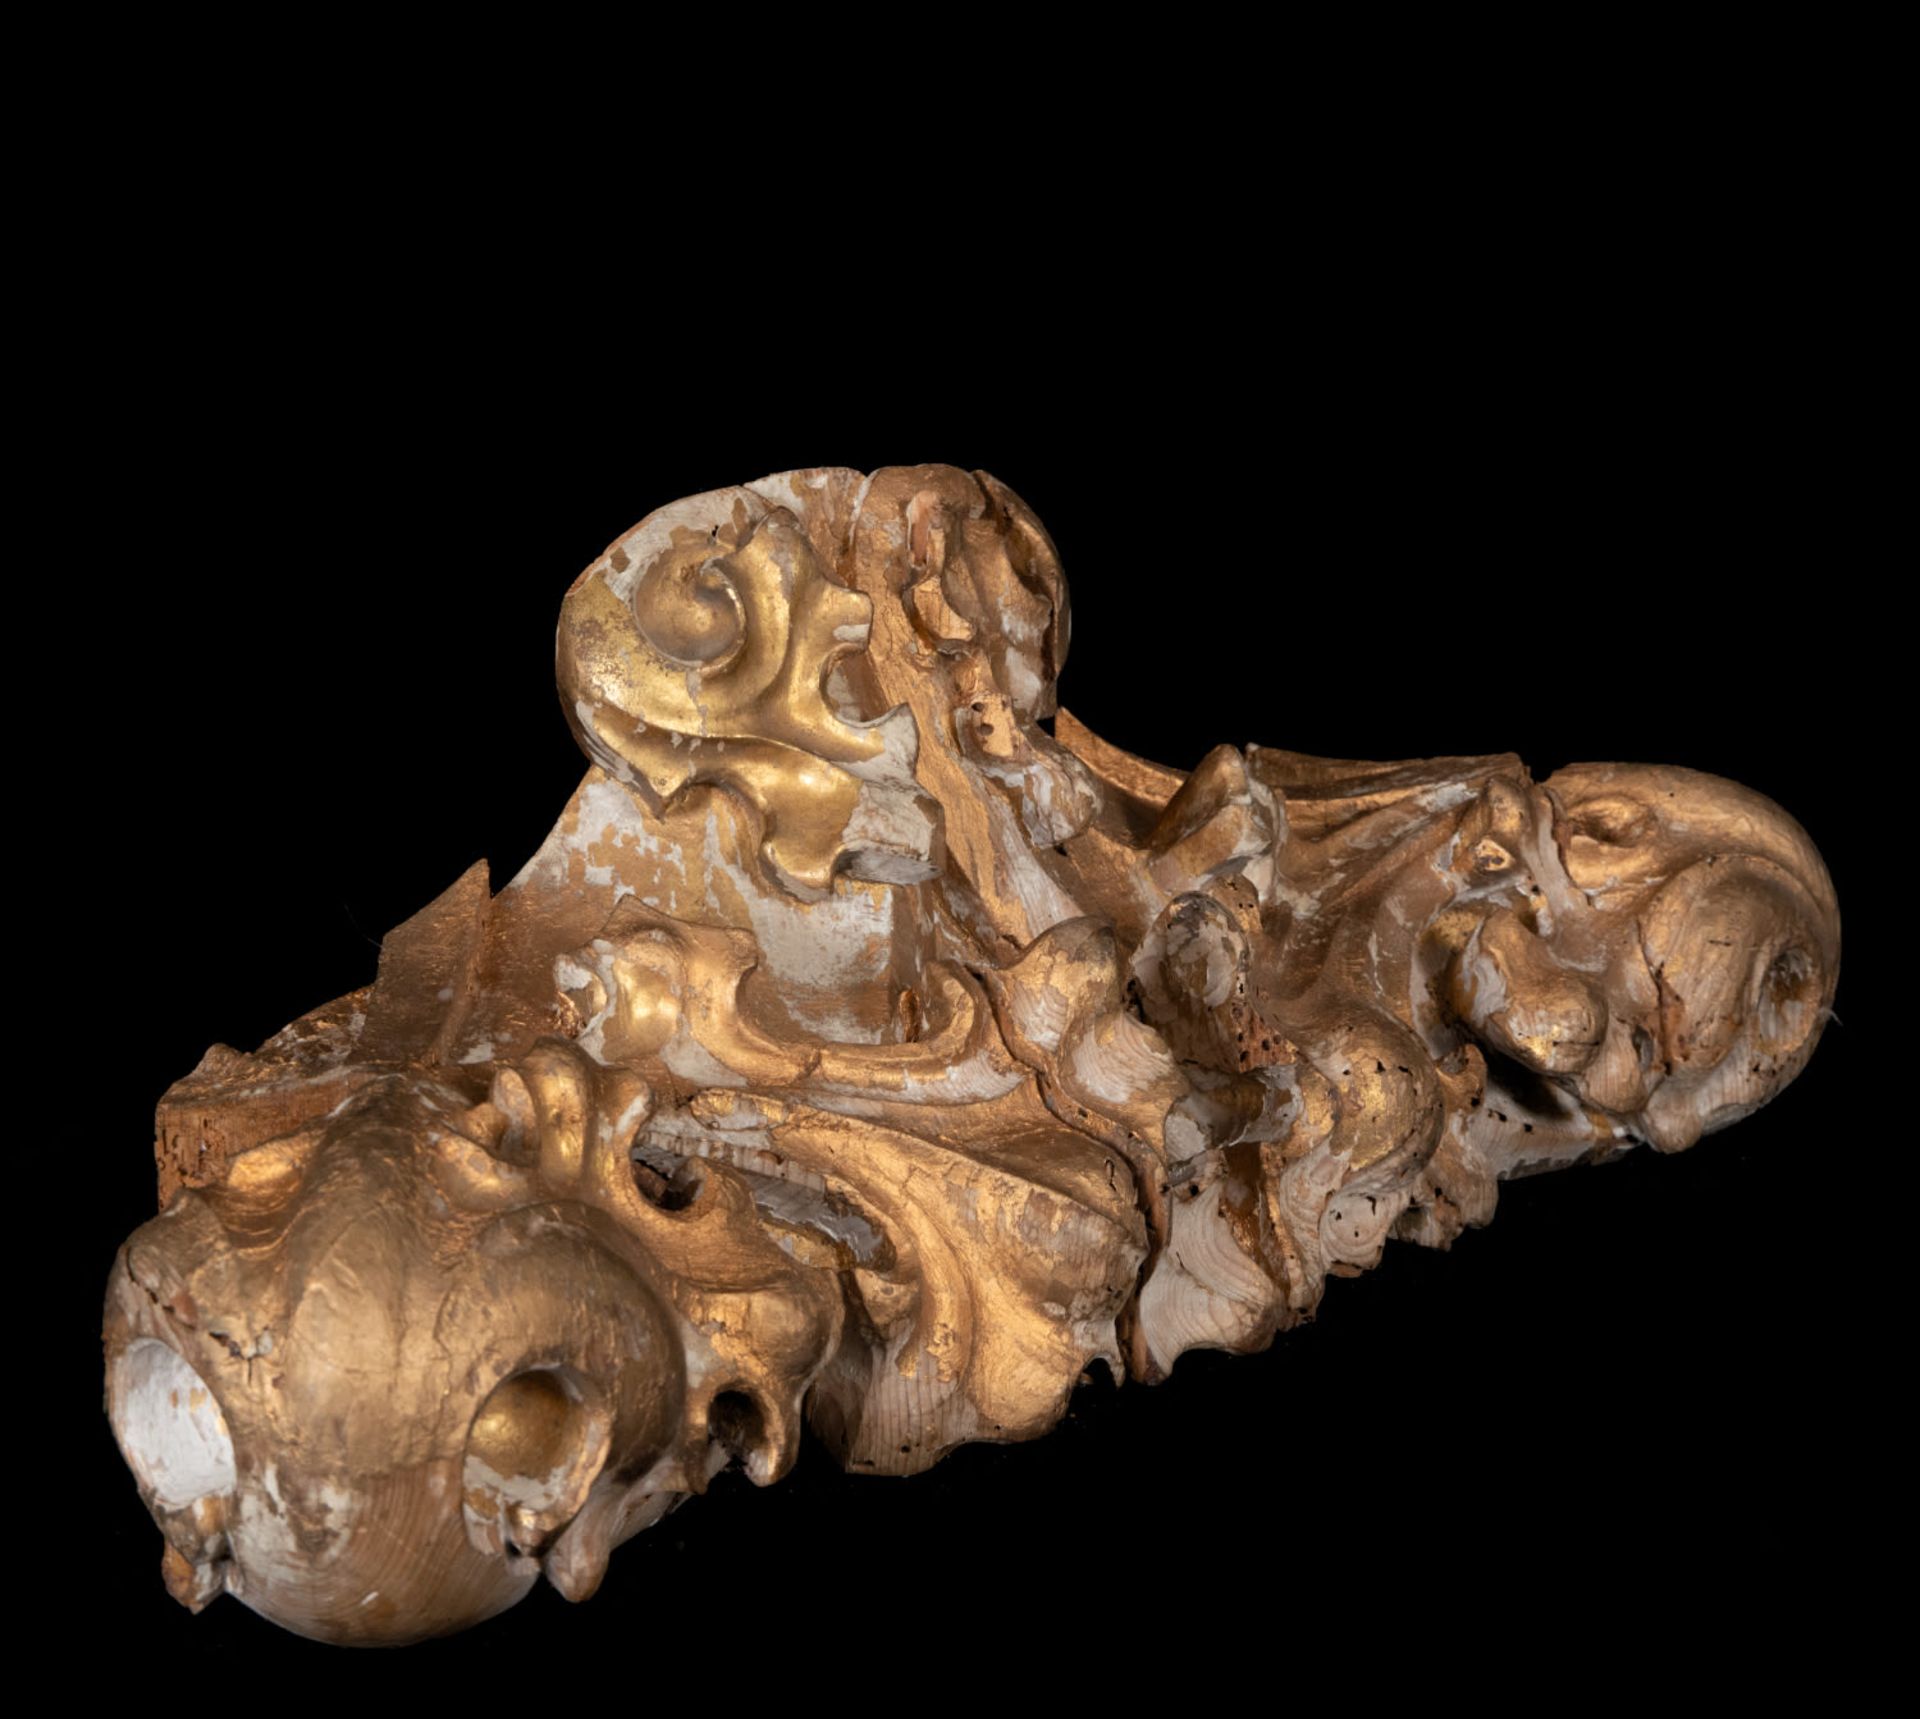 Pair of German or Austrian Rococo corbels from the 18th century - Image 4 of 7